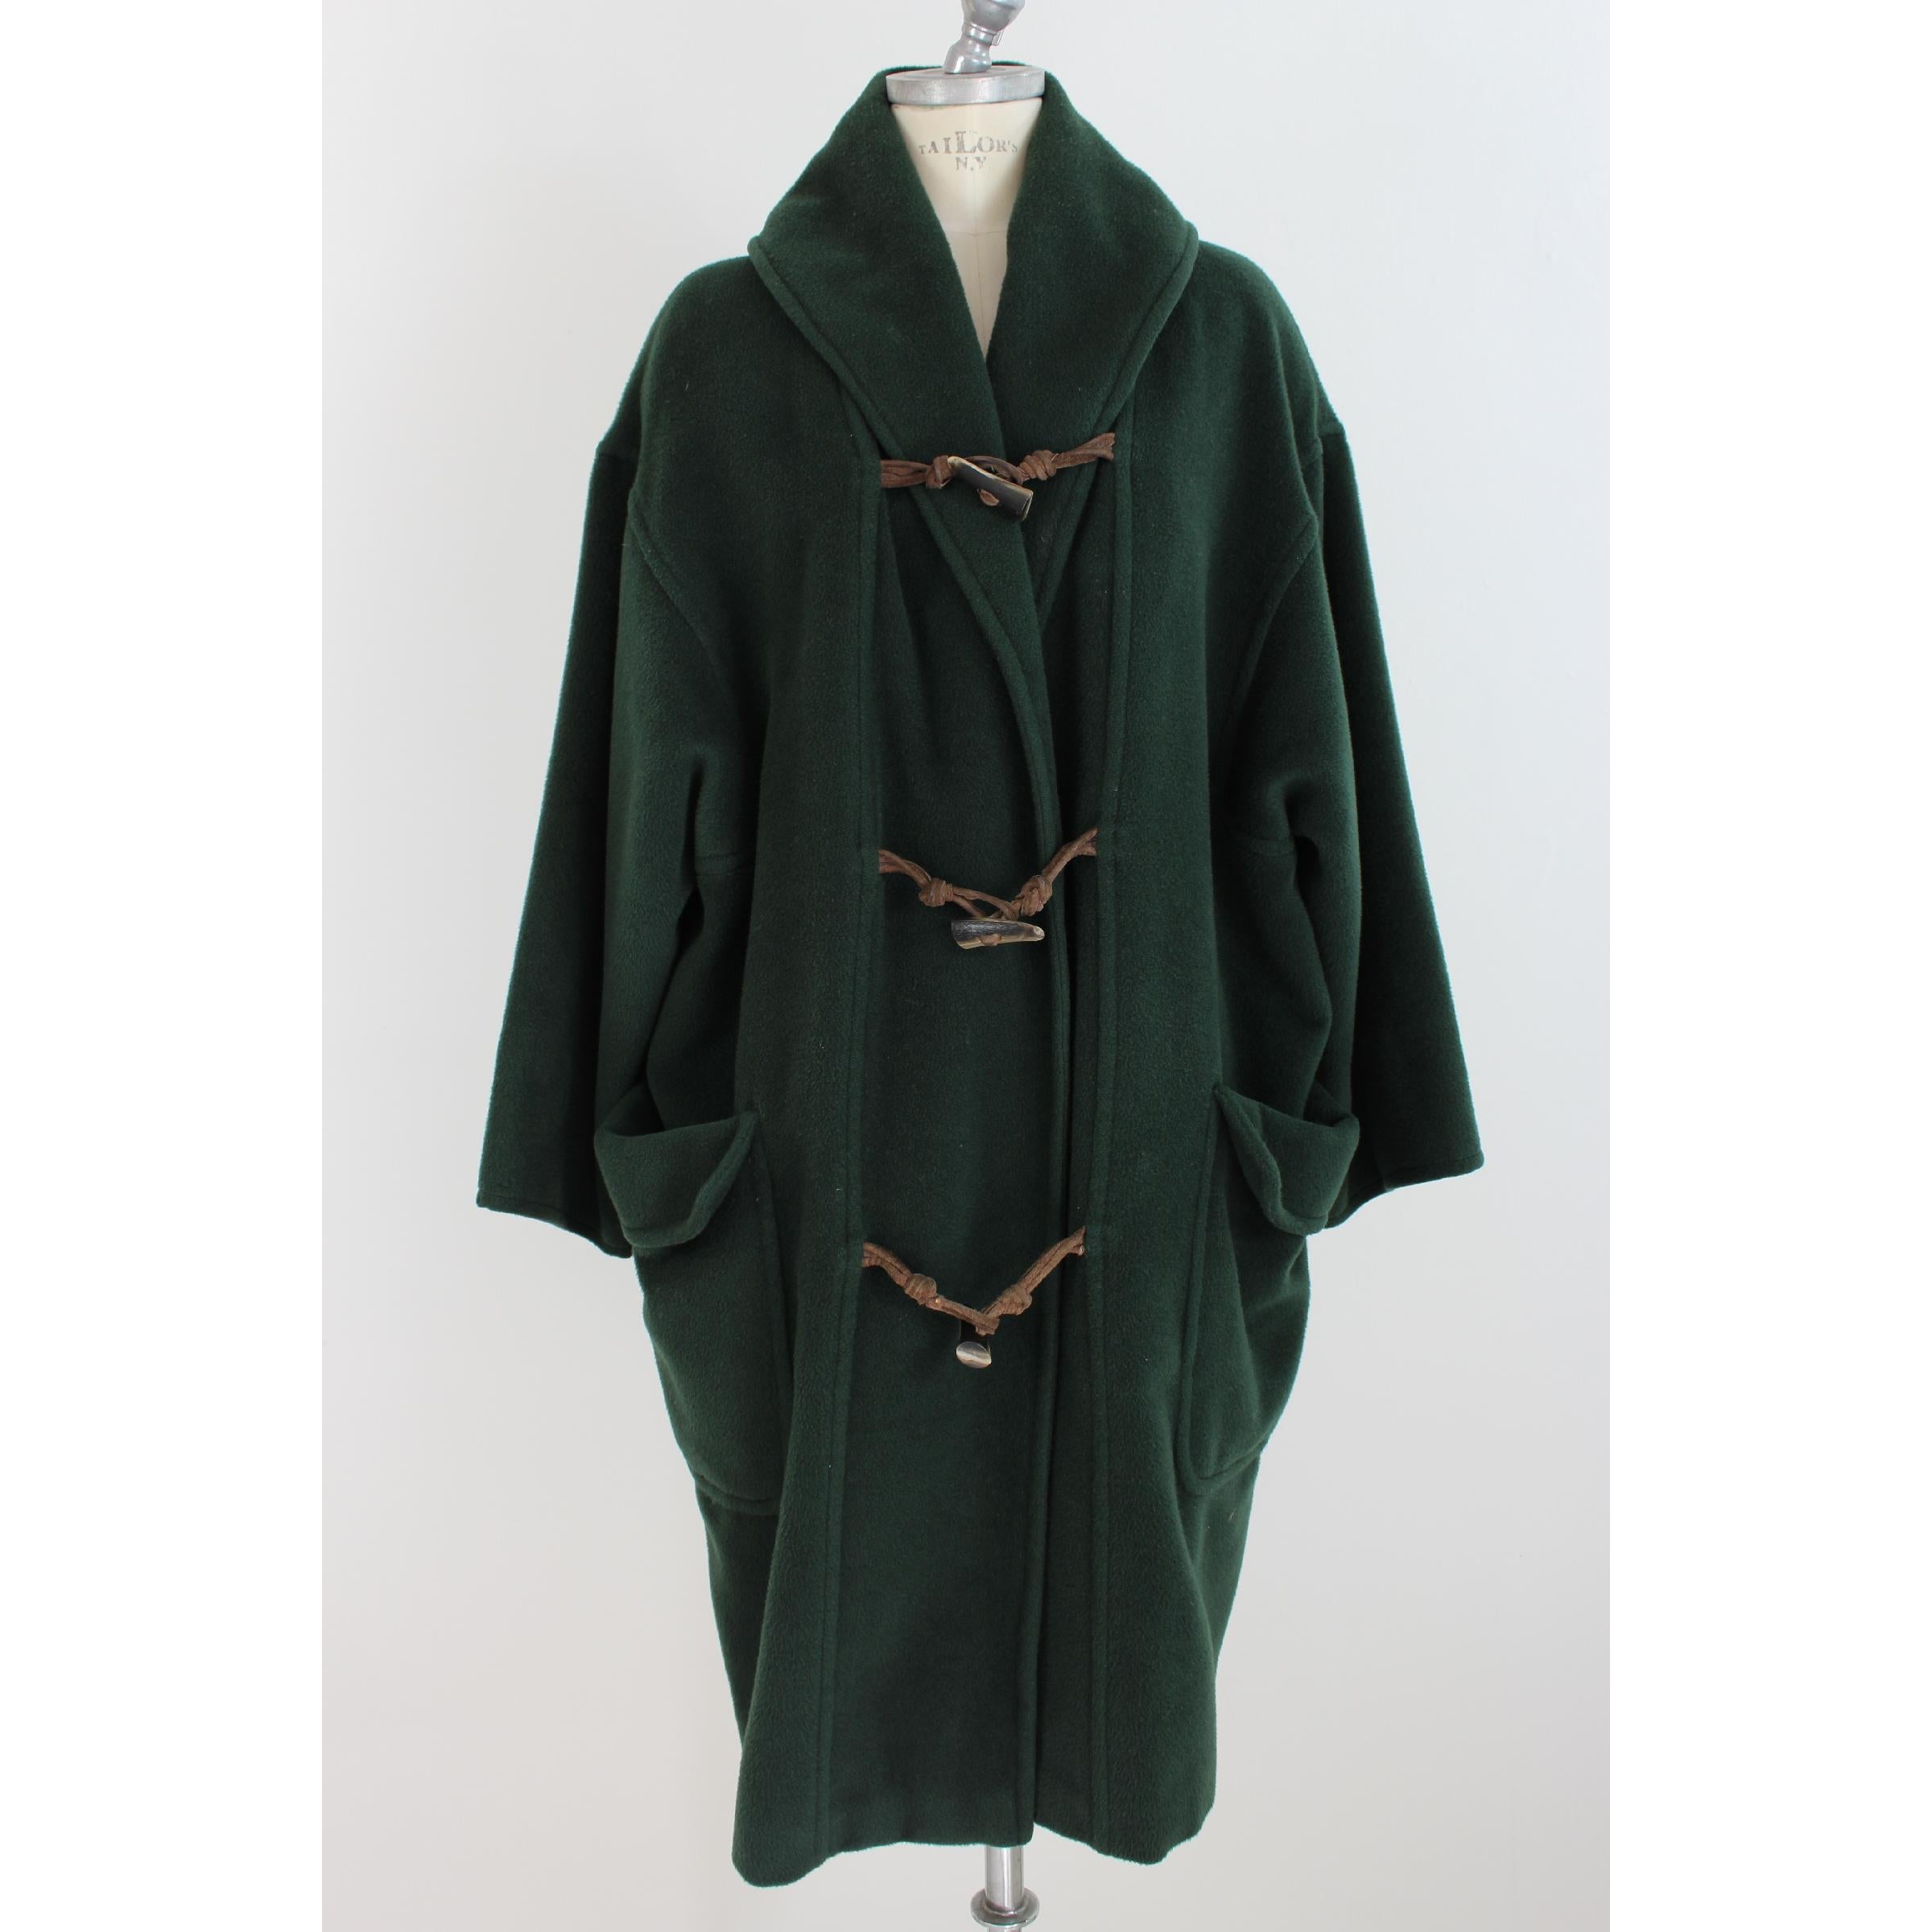 Vintage Max & Co women's coat, duffle coat, green, 95% virgin wool 5% kashmere. Closing with frogs. 1990s. Made in Italy. Good vintage conditions, there are some imperfections like in the picture.

Size: 42 It 8 Us 10 Uk

Shoulder: 44 cm
Bust /